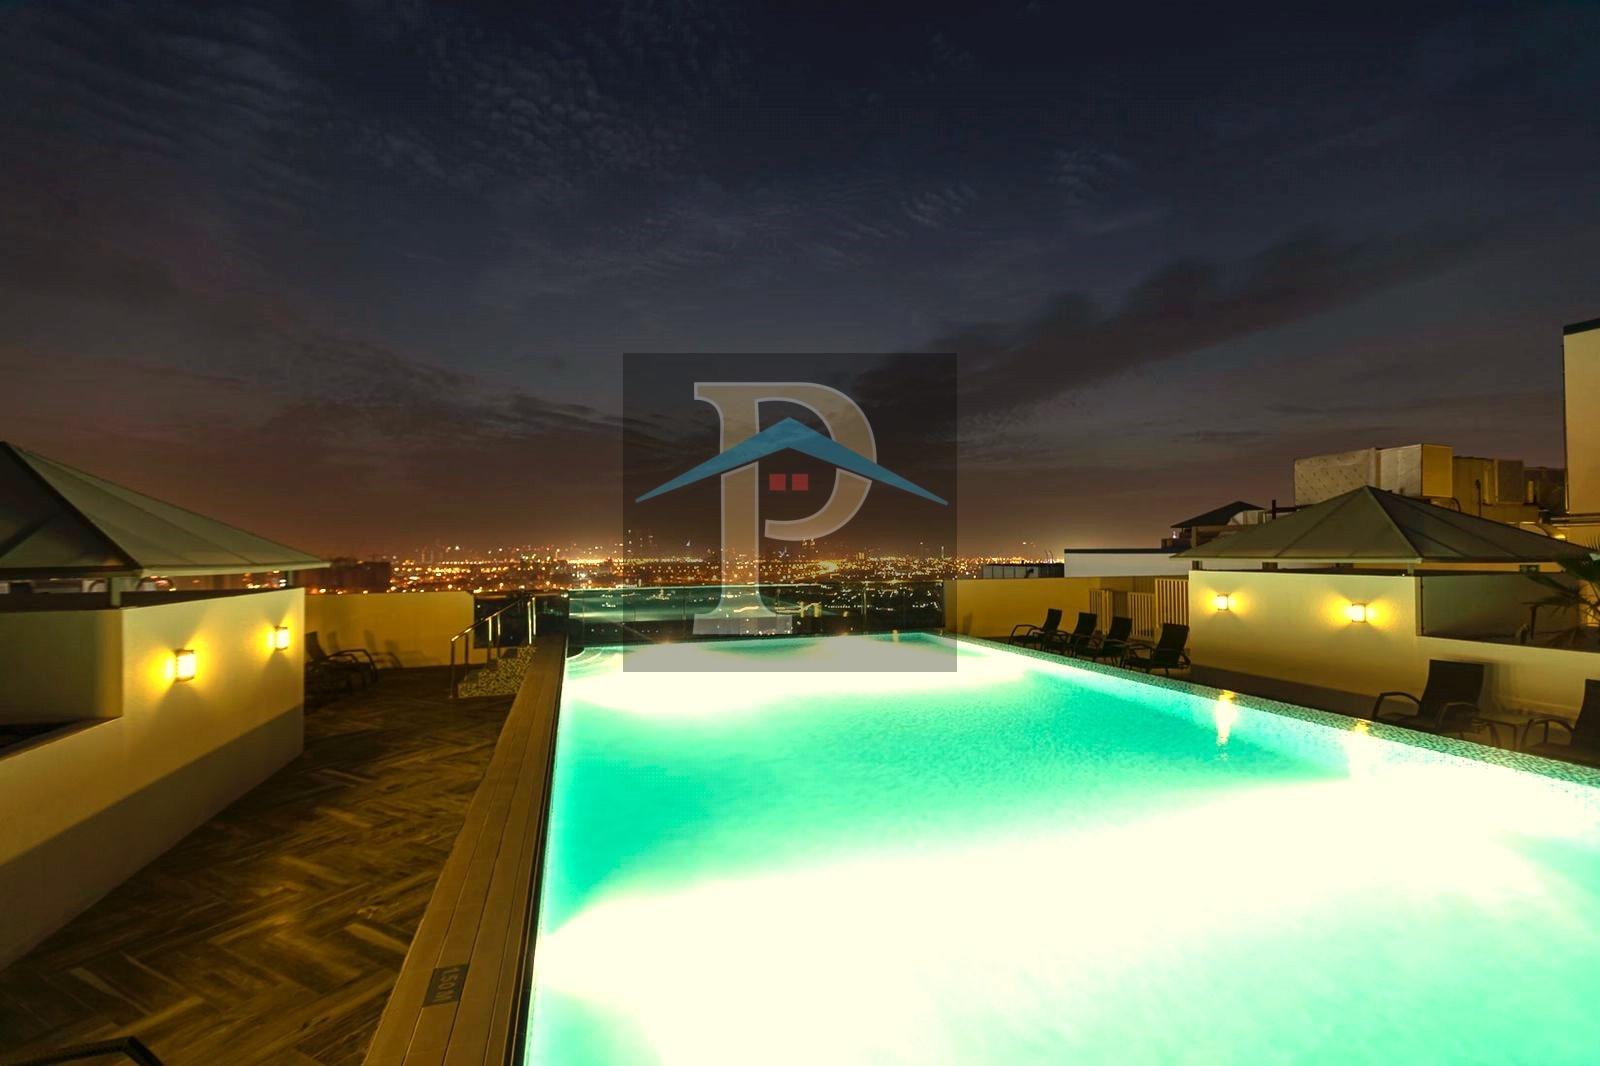 2 bed, 3 bath Apartment for rent in Geepas Tower, Arjan, Dubai for price AED 82999 yearly 